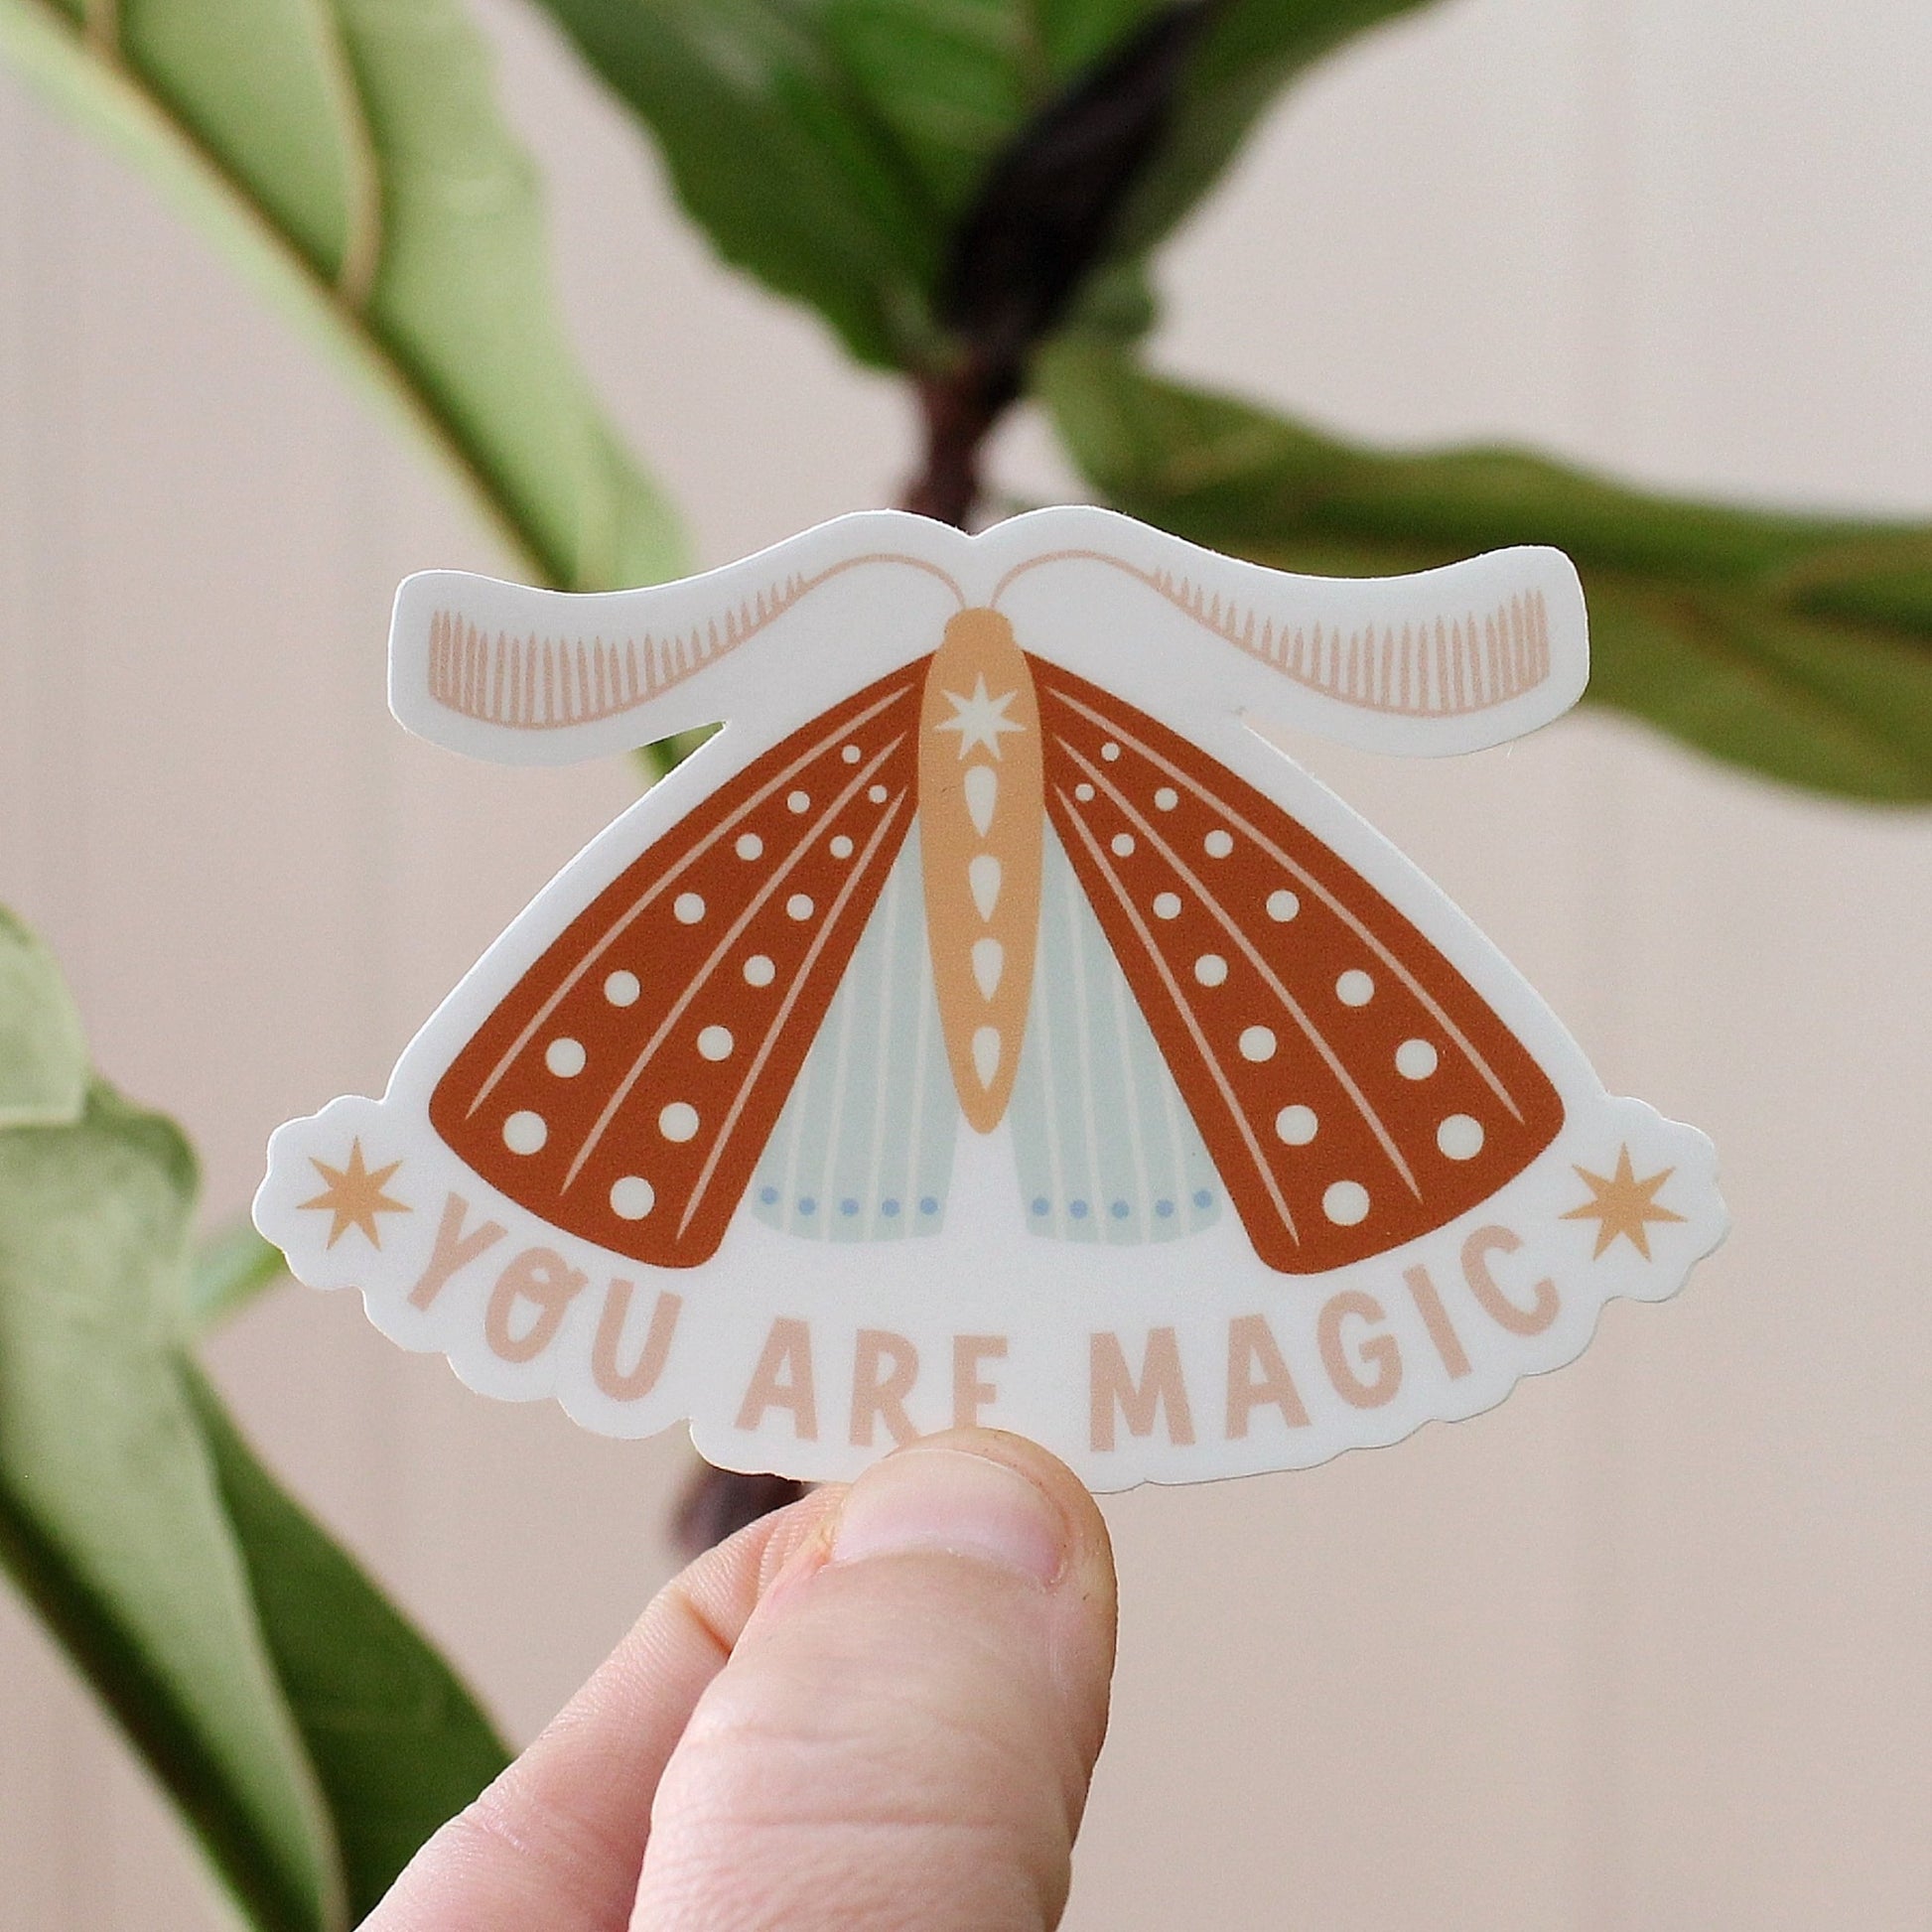 rust, peach and light blue moth vinyl sticker with the words you are magic